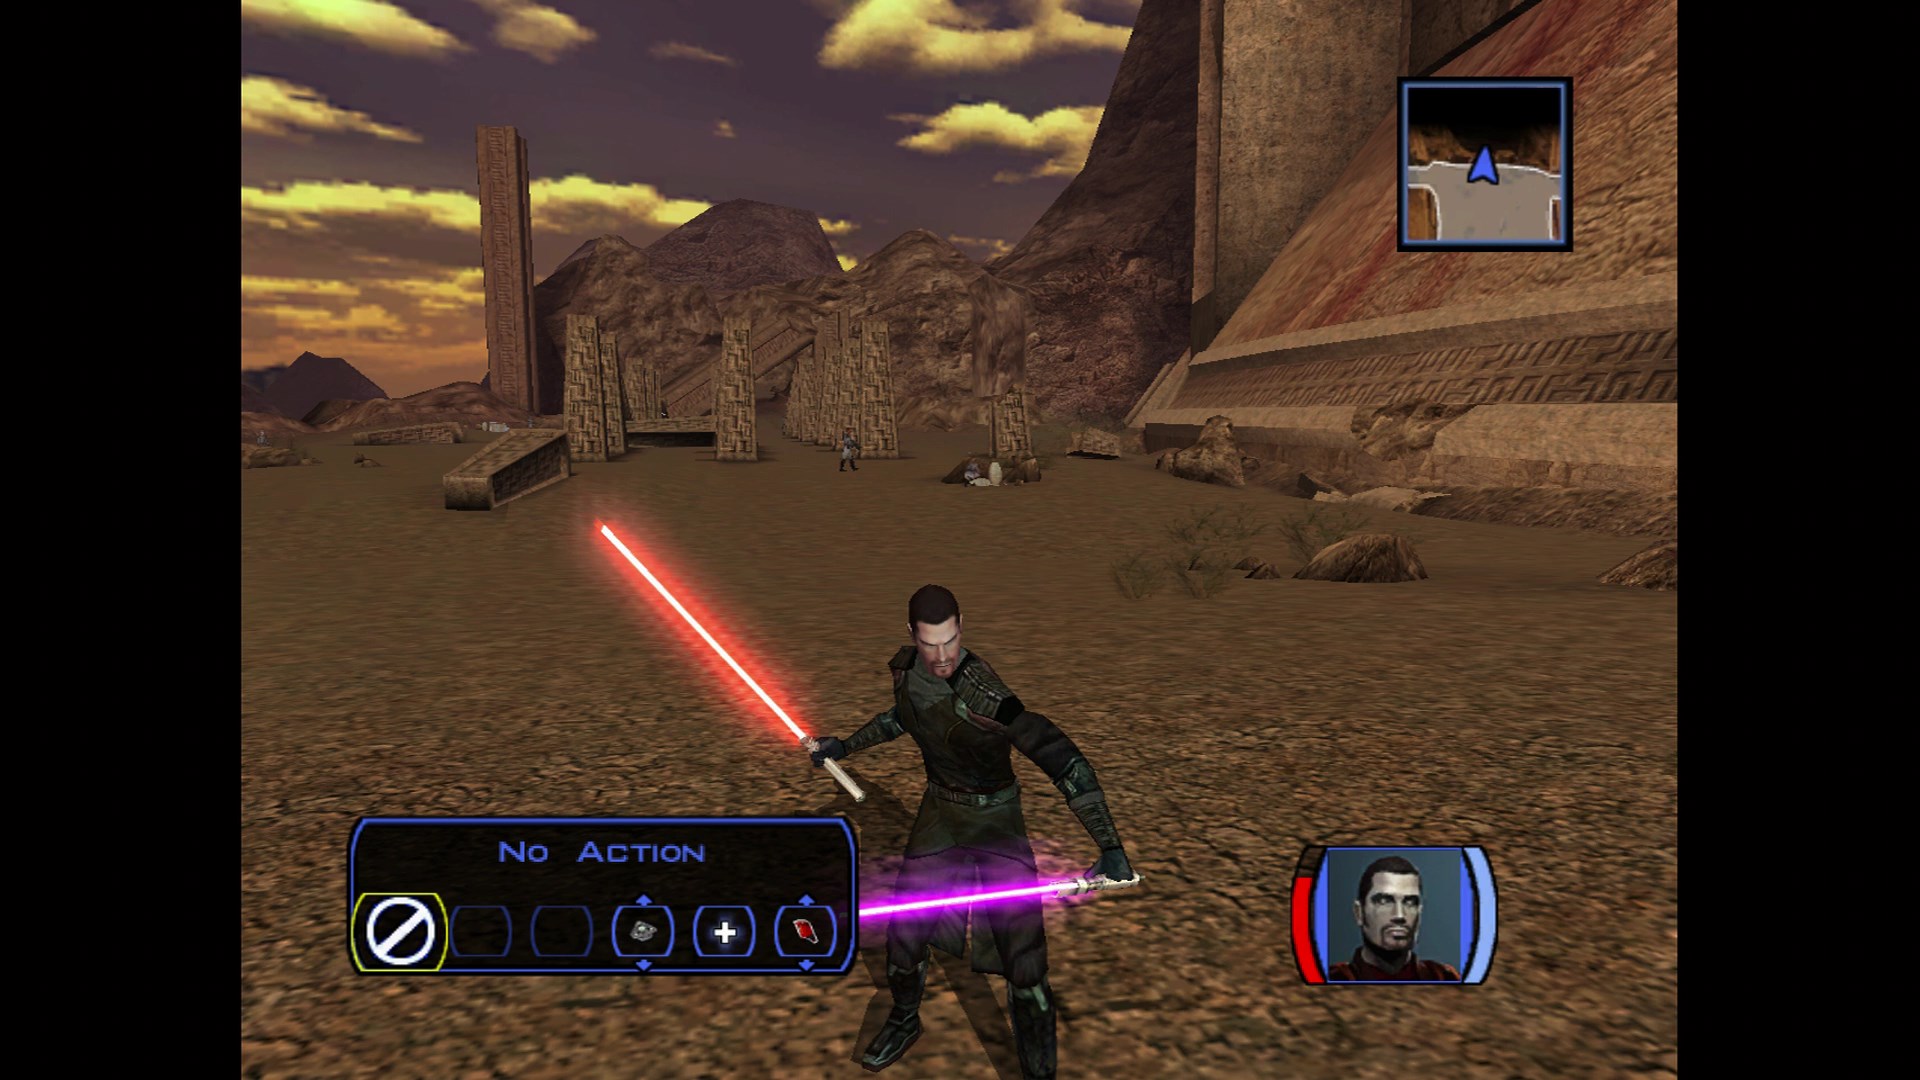 star wars knights of the old republic on xbox one